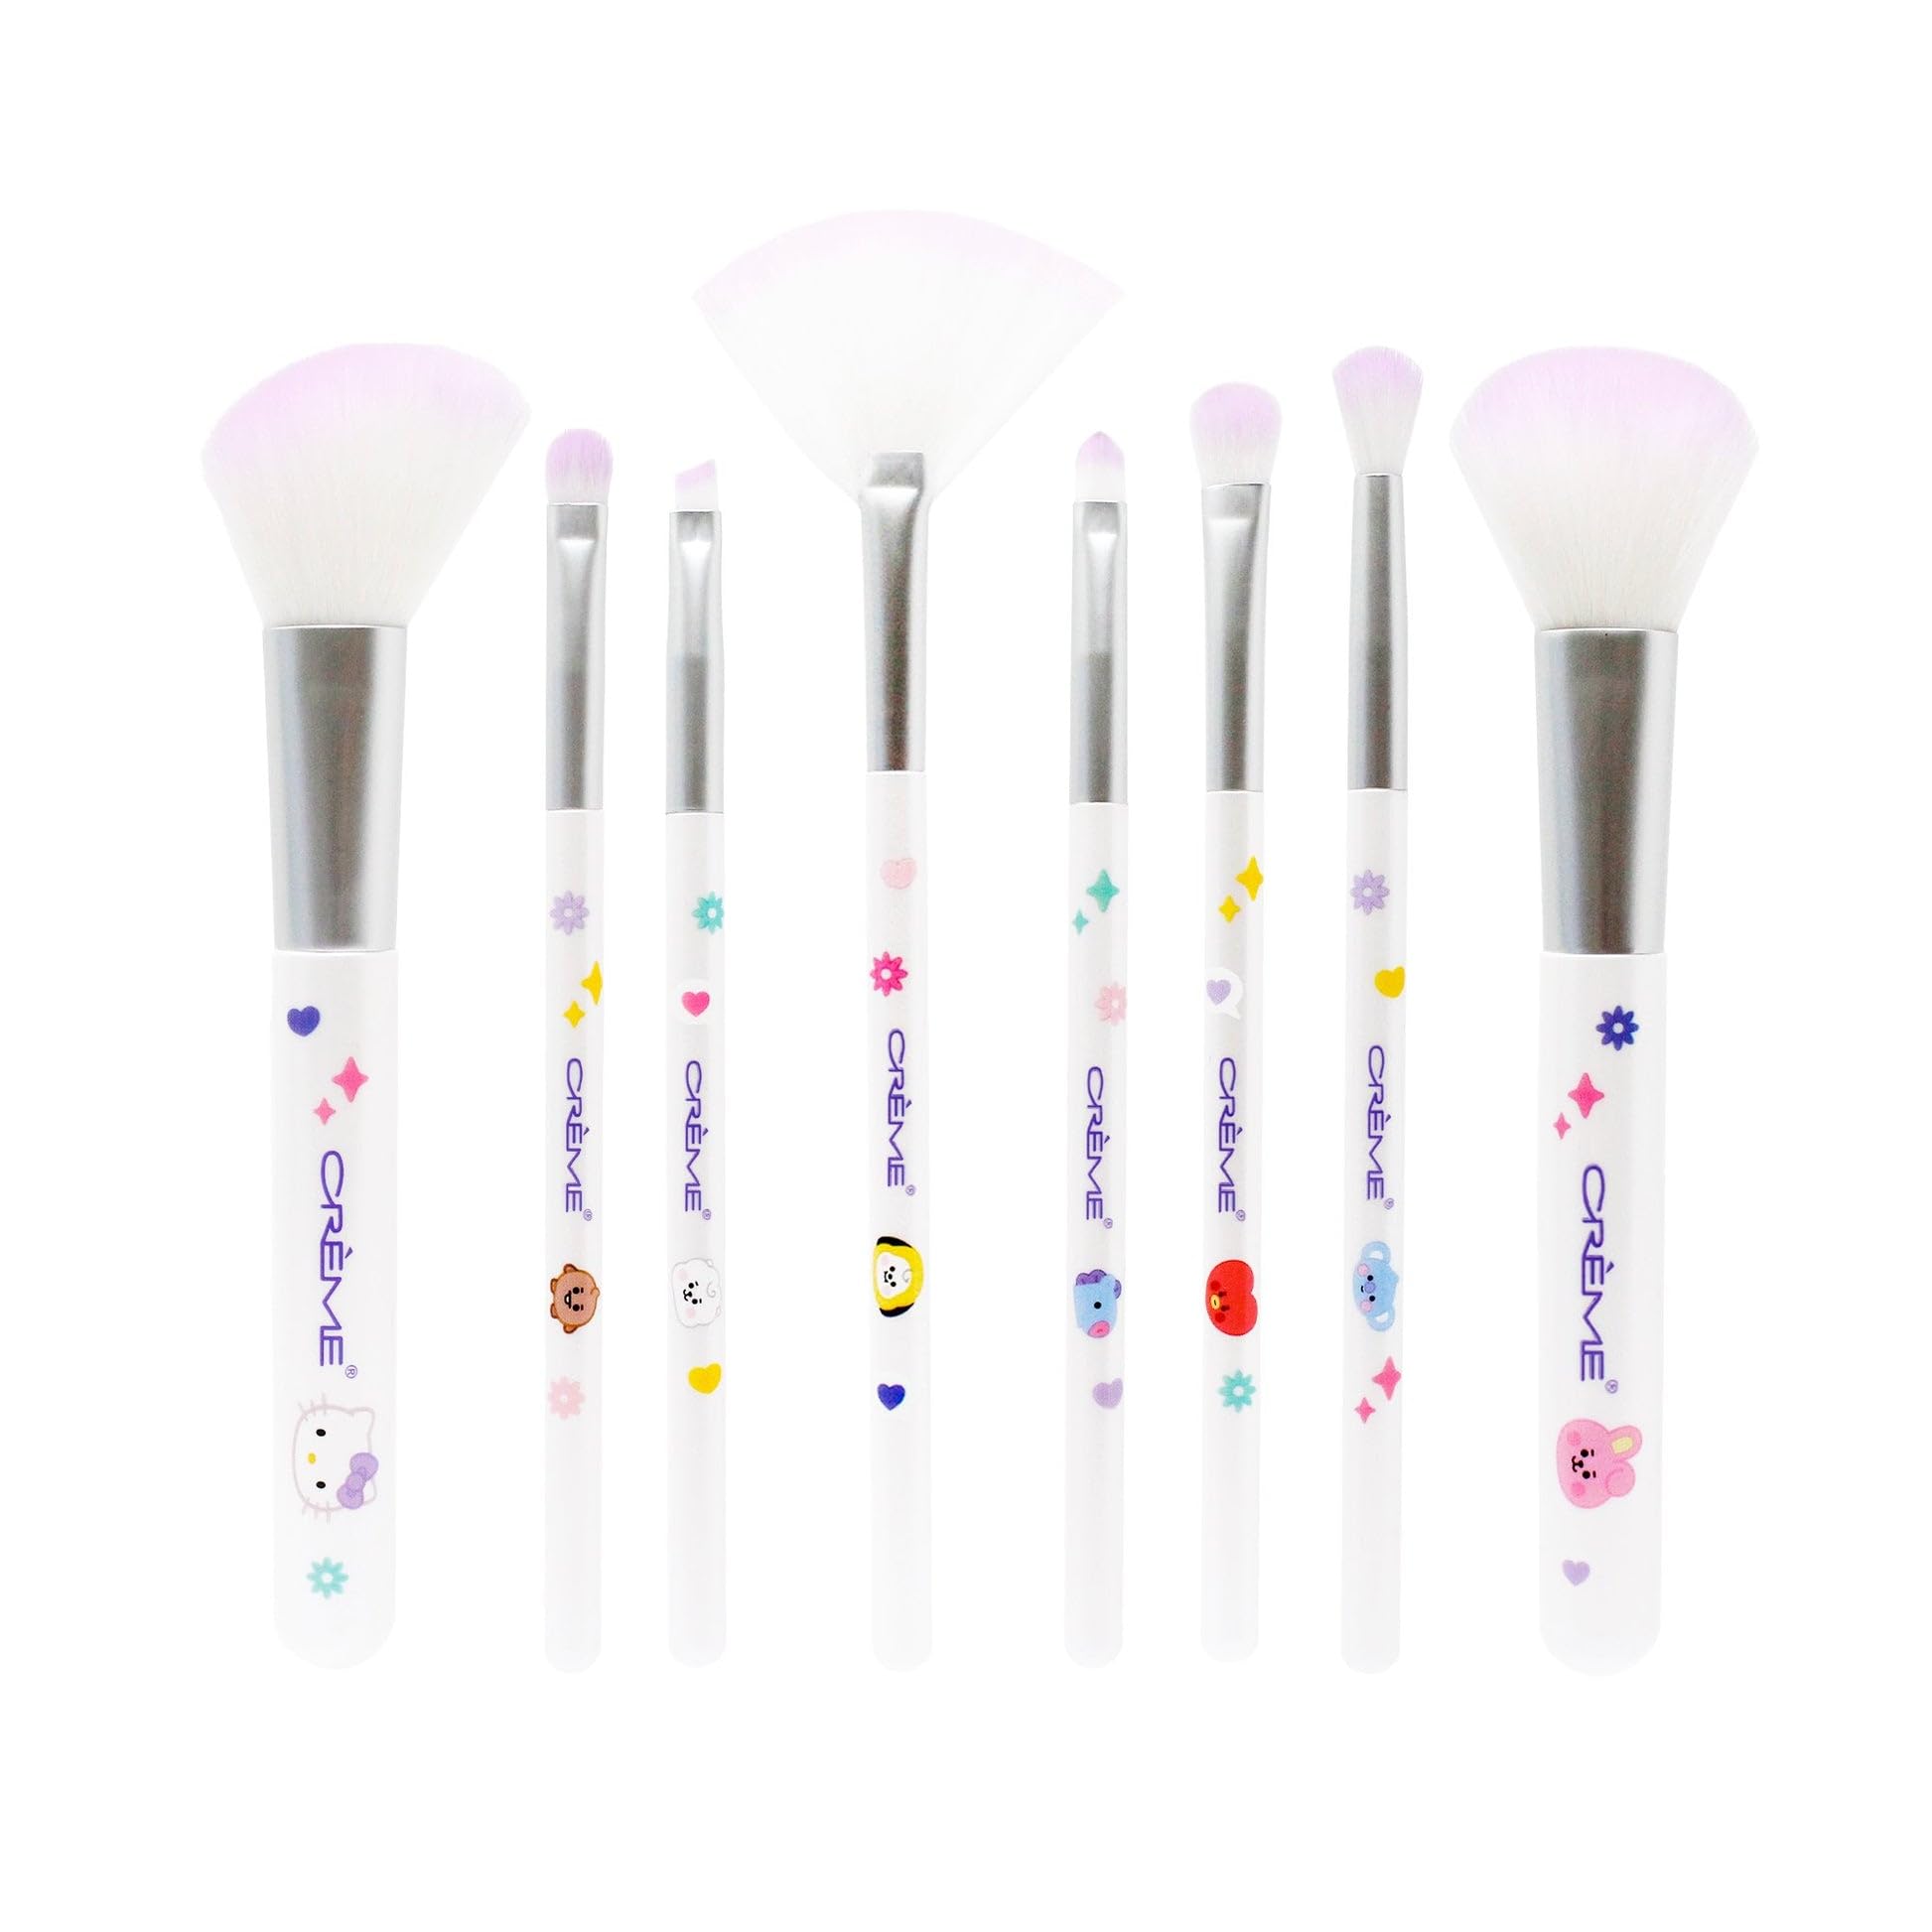 Hello Kitty & BT21 Dreamy Essentials Makeup Brush Collection: Premium Bristles, Flawless Application, Character-Themed Designs, Vegan, Cruelty-Free, Easy Maintenance (Set of 8)